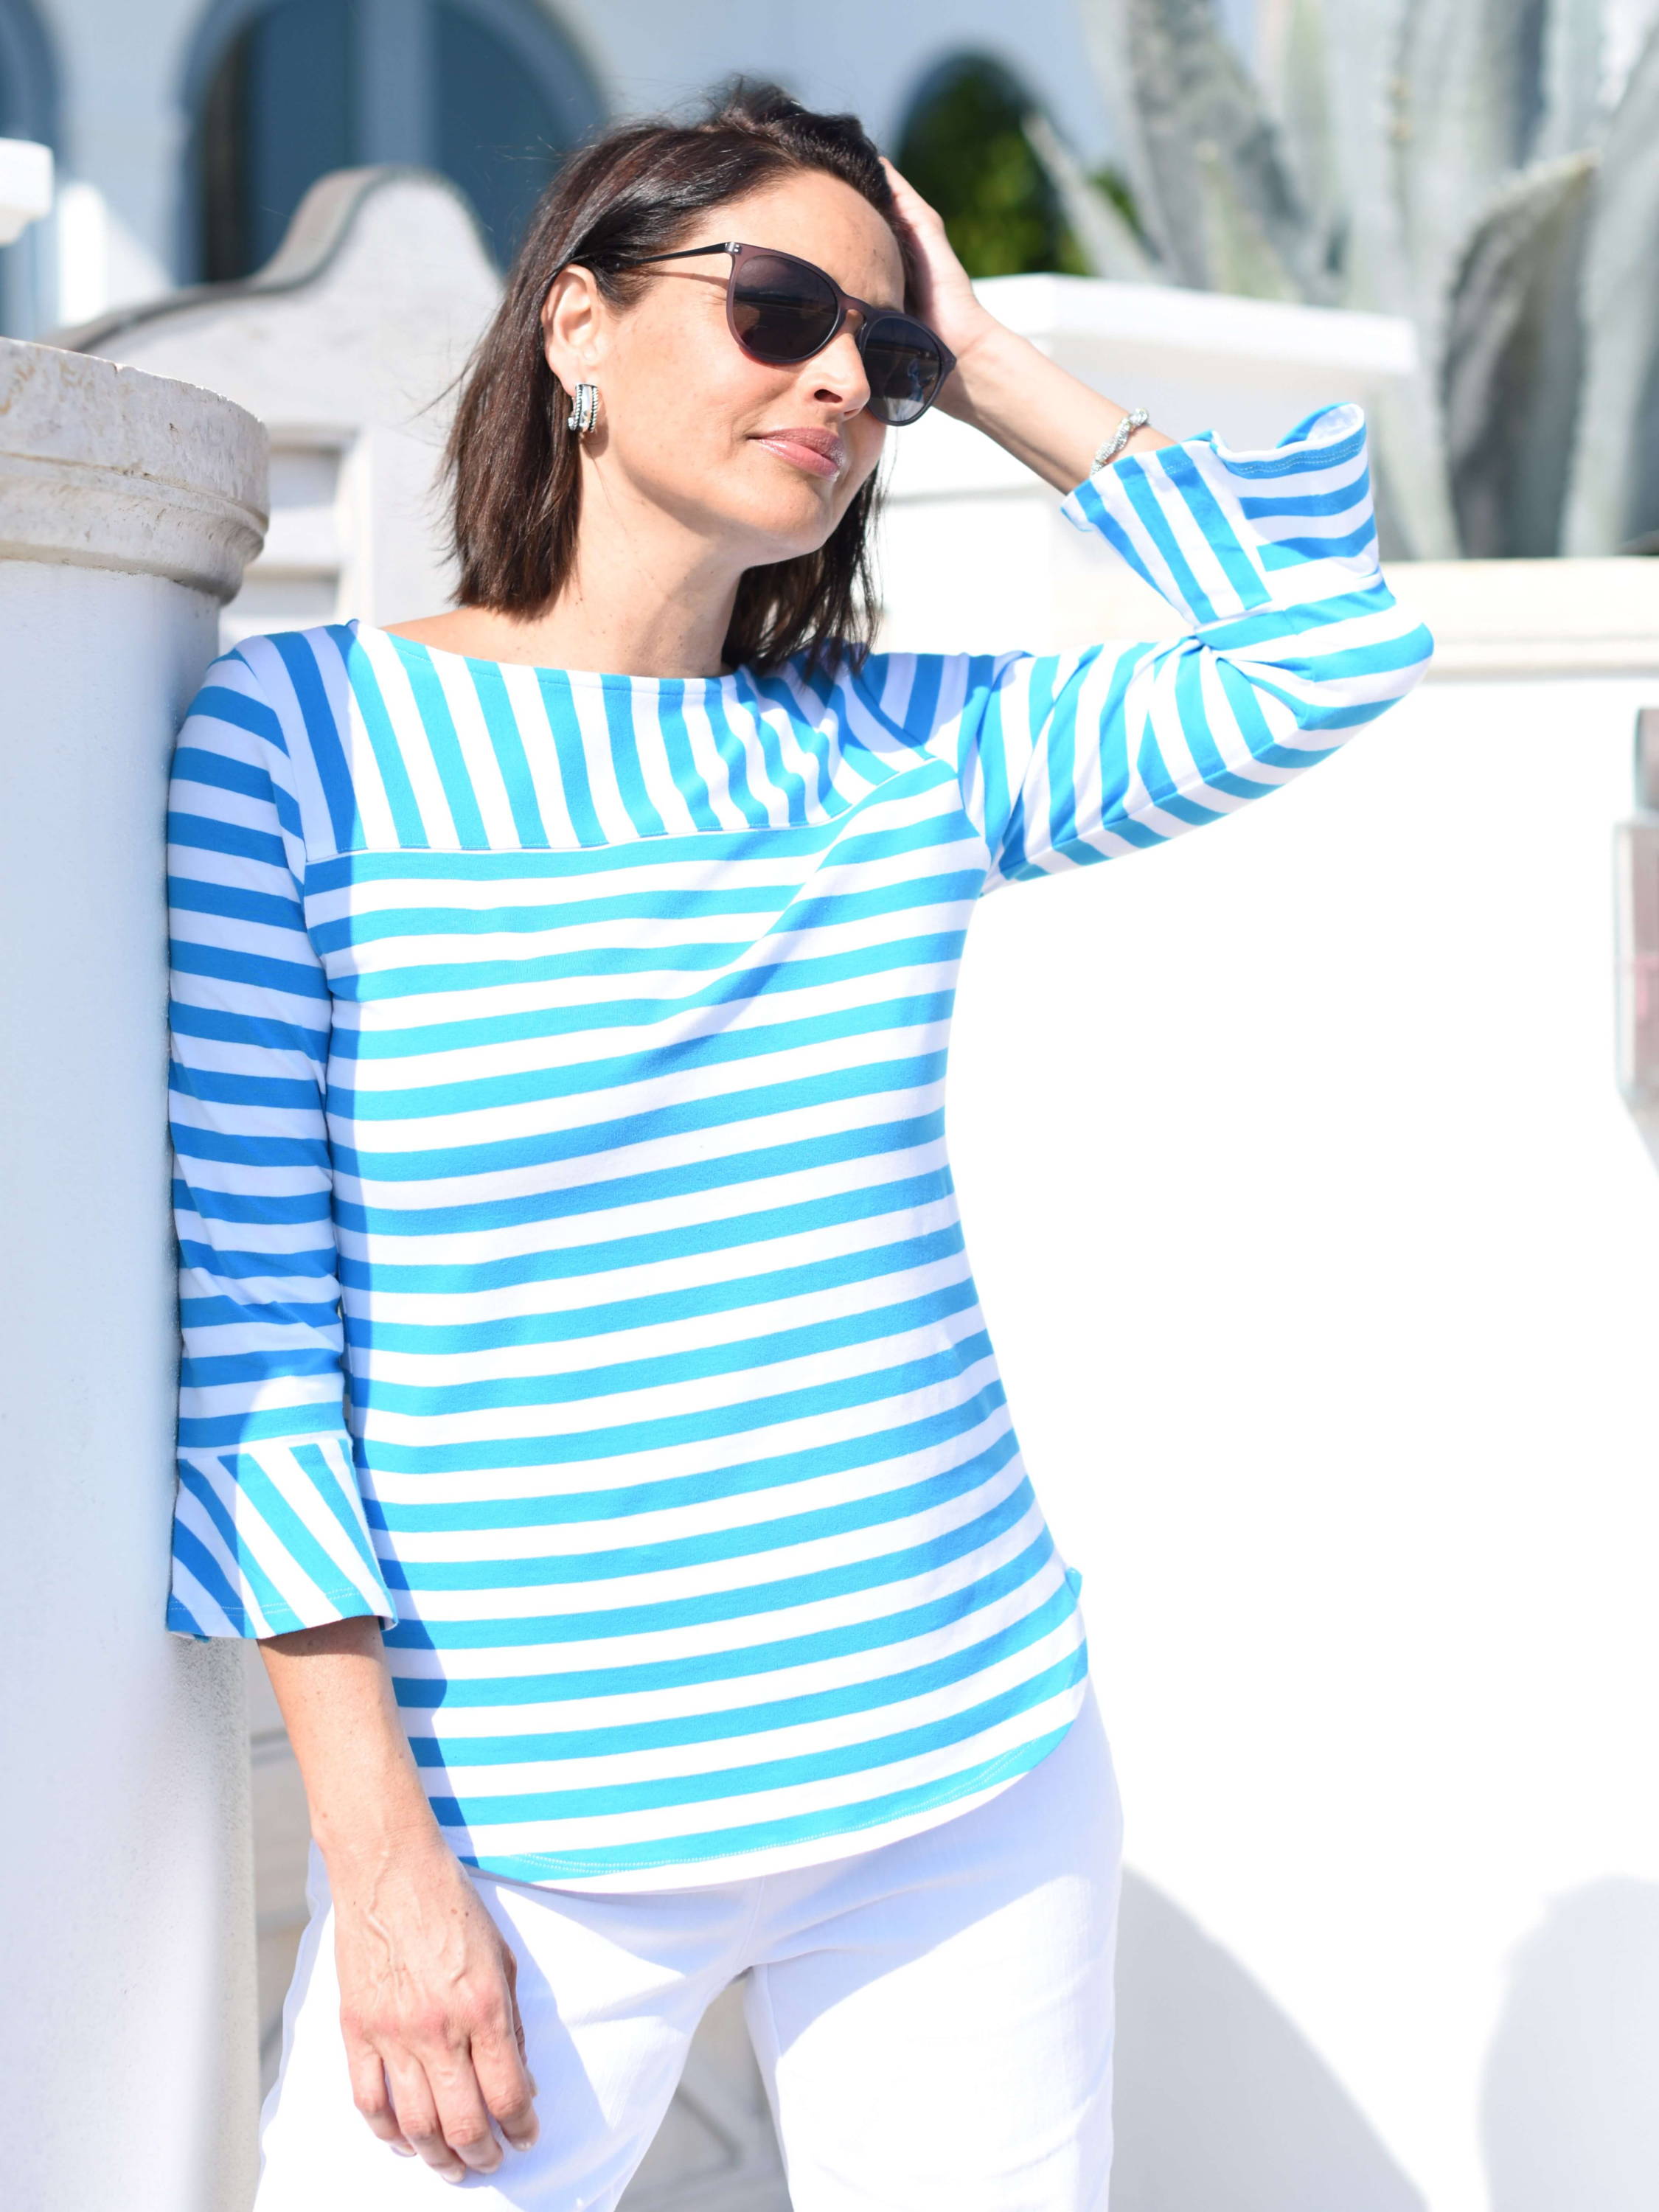 A woman in a blue and white striped top  and sunglasses leans against a white wall.